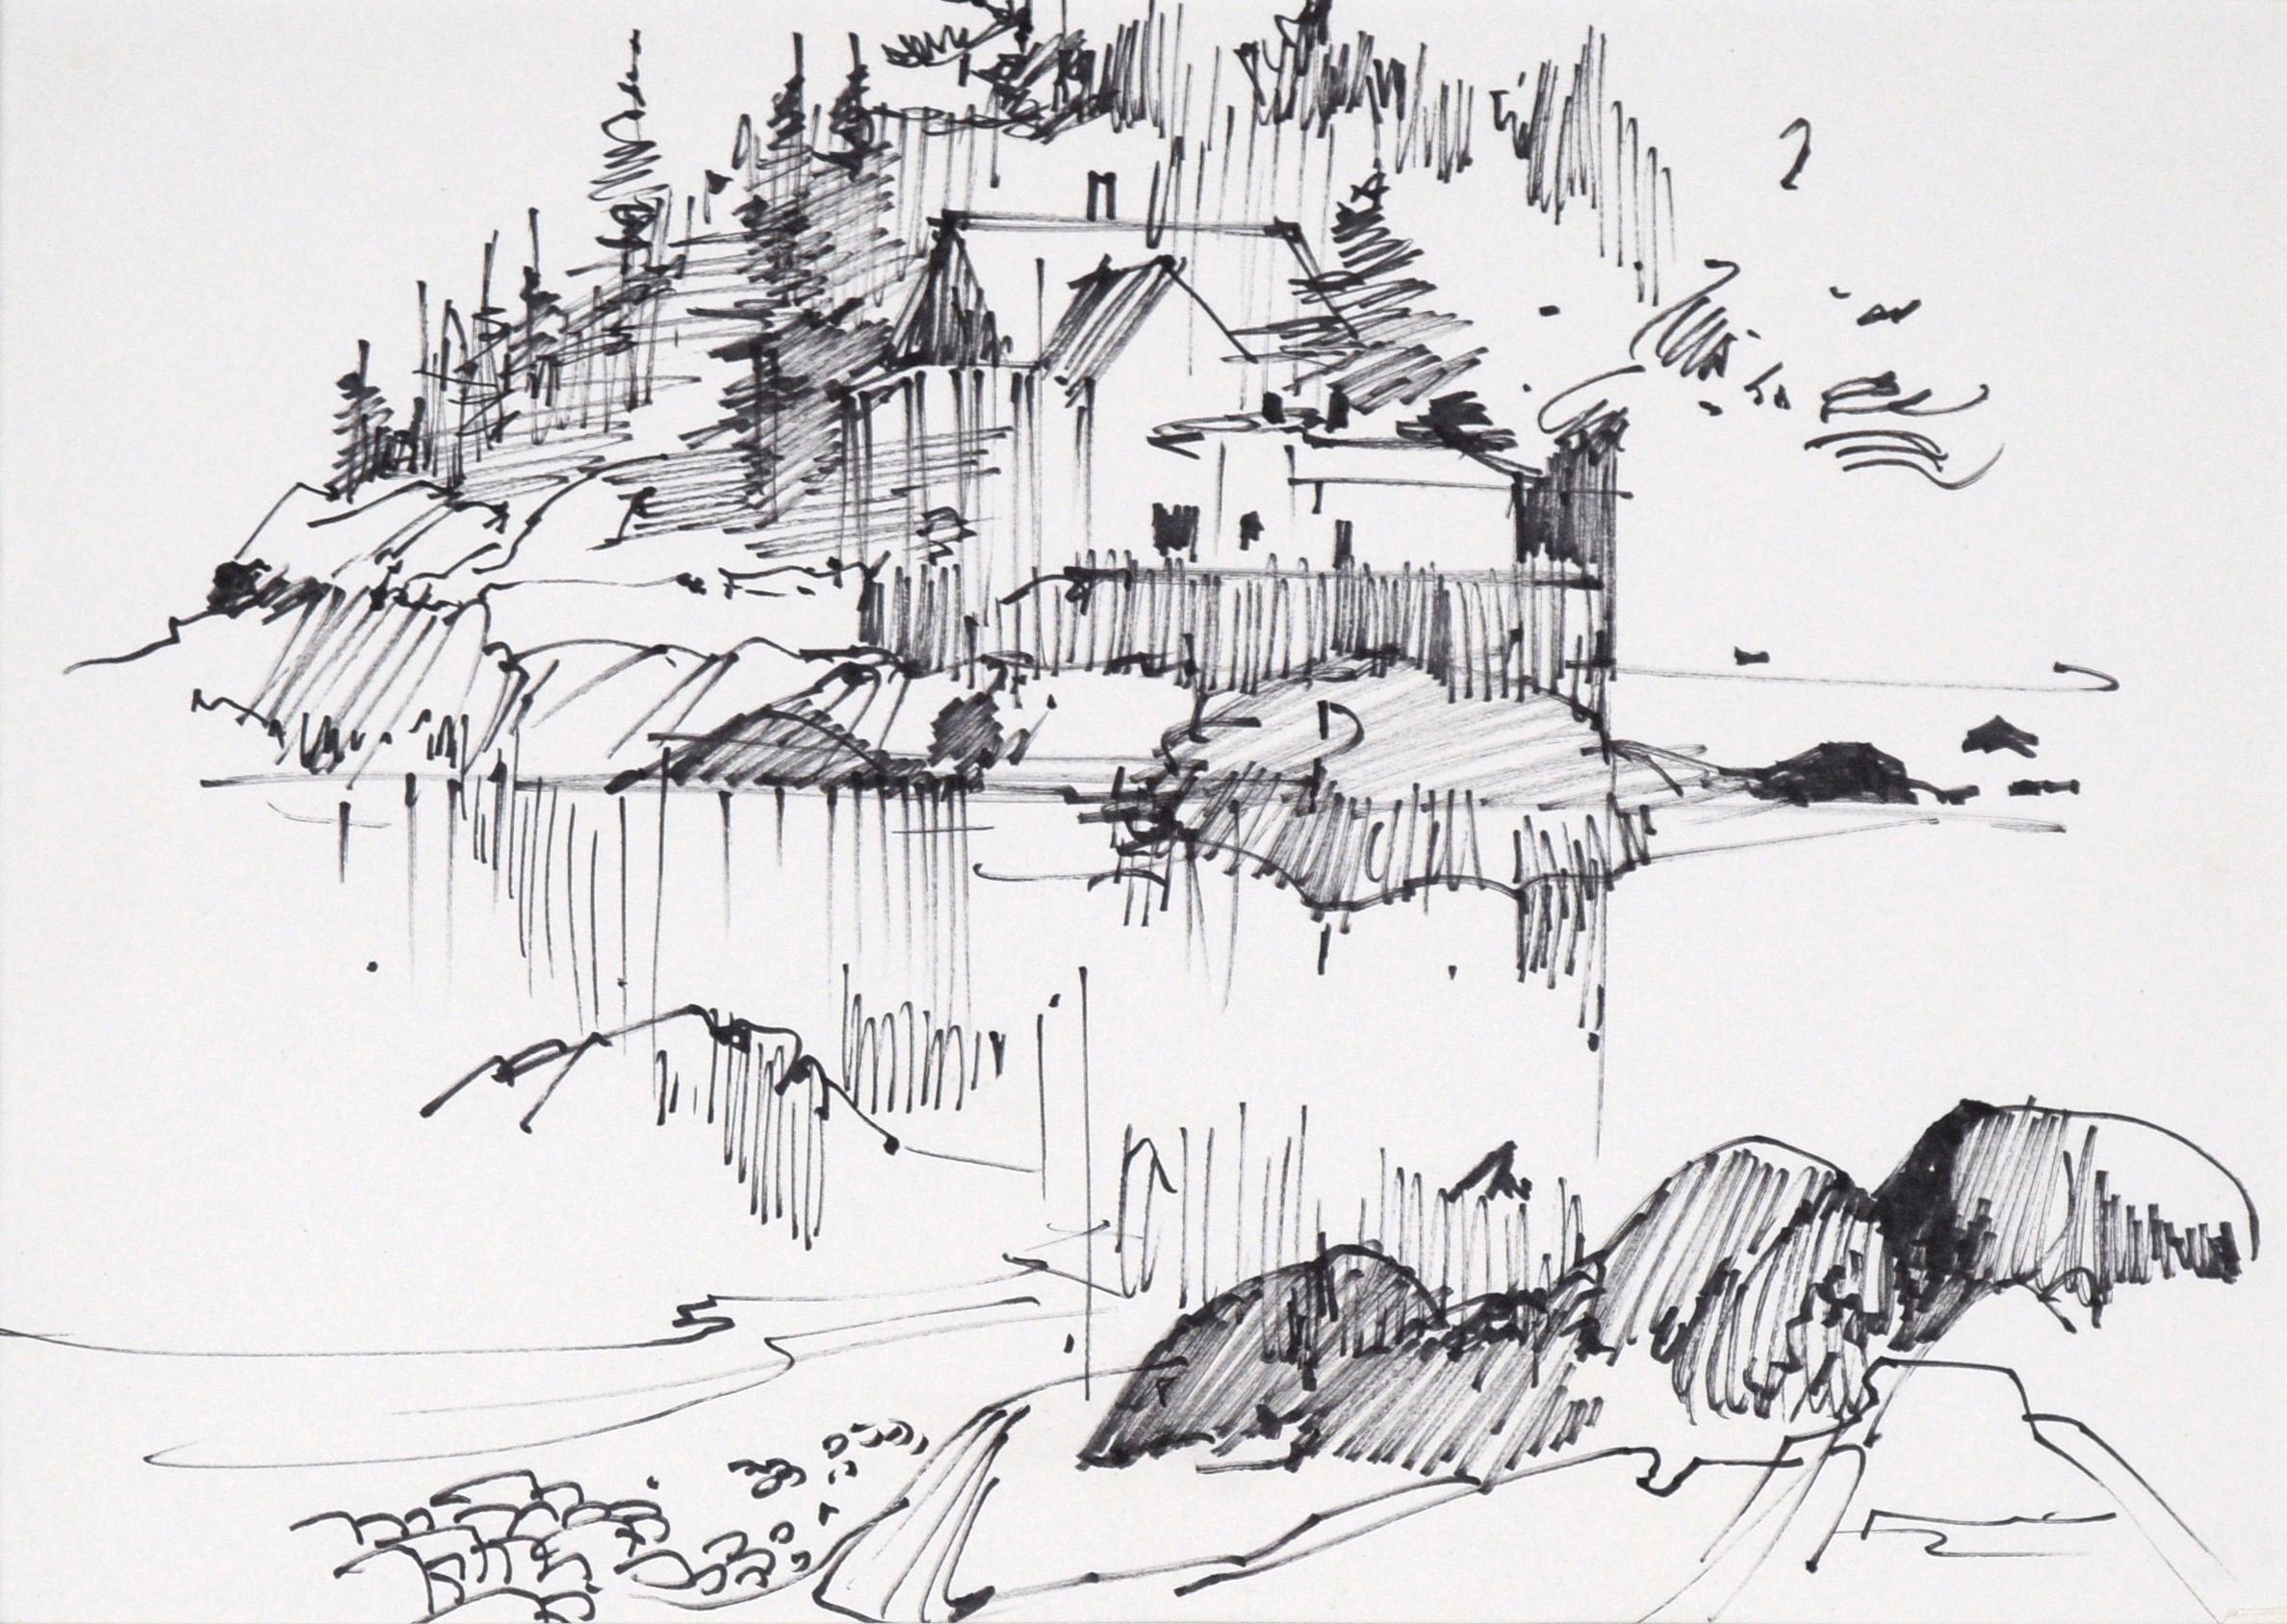 House Across the Lake - Line Drawing Landscape in Ink on Paper - Art by Laurence Sisson